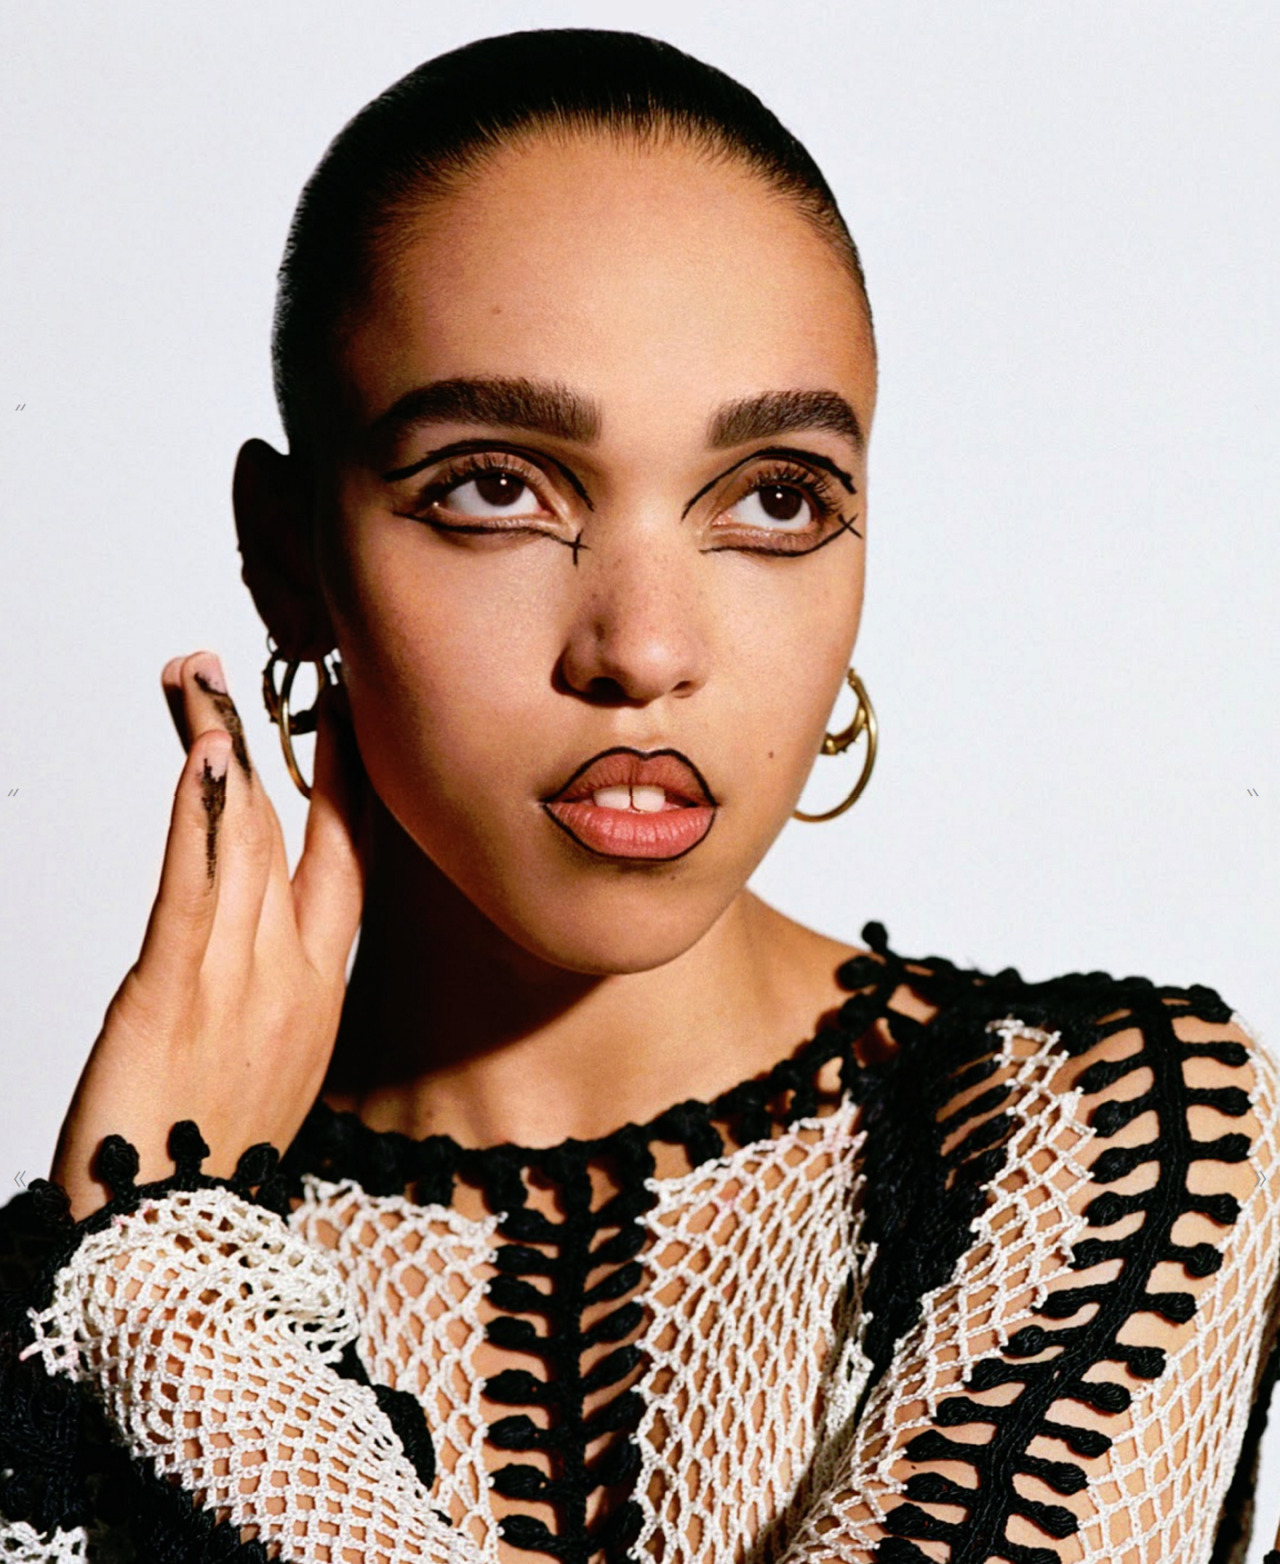 fka twigs magazine cover story fka twigs a divine invention tahliah